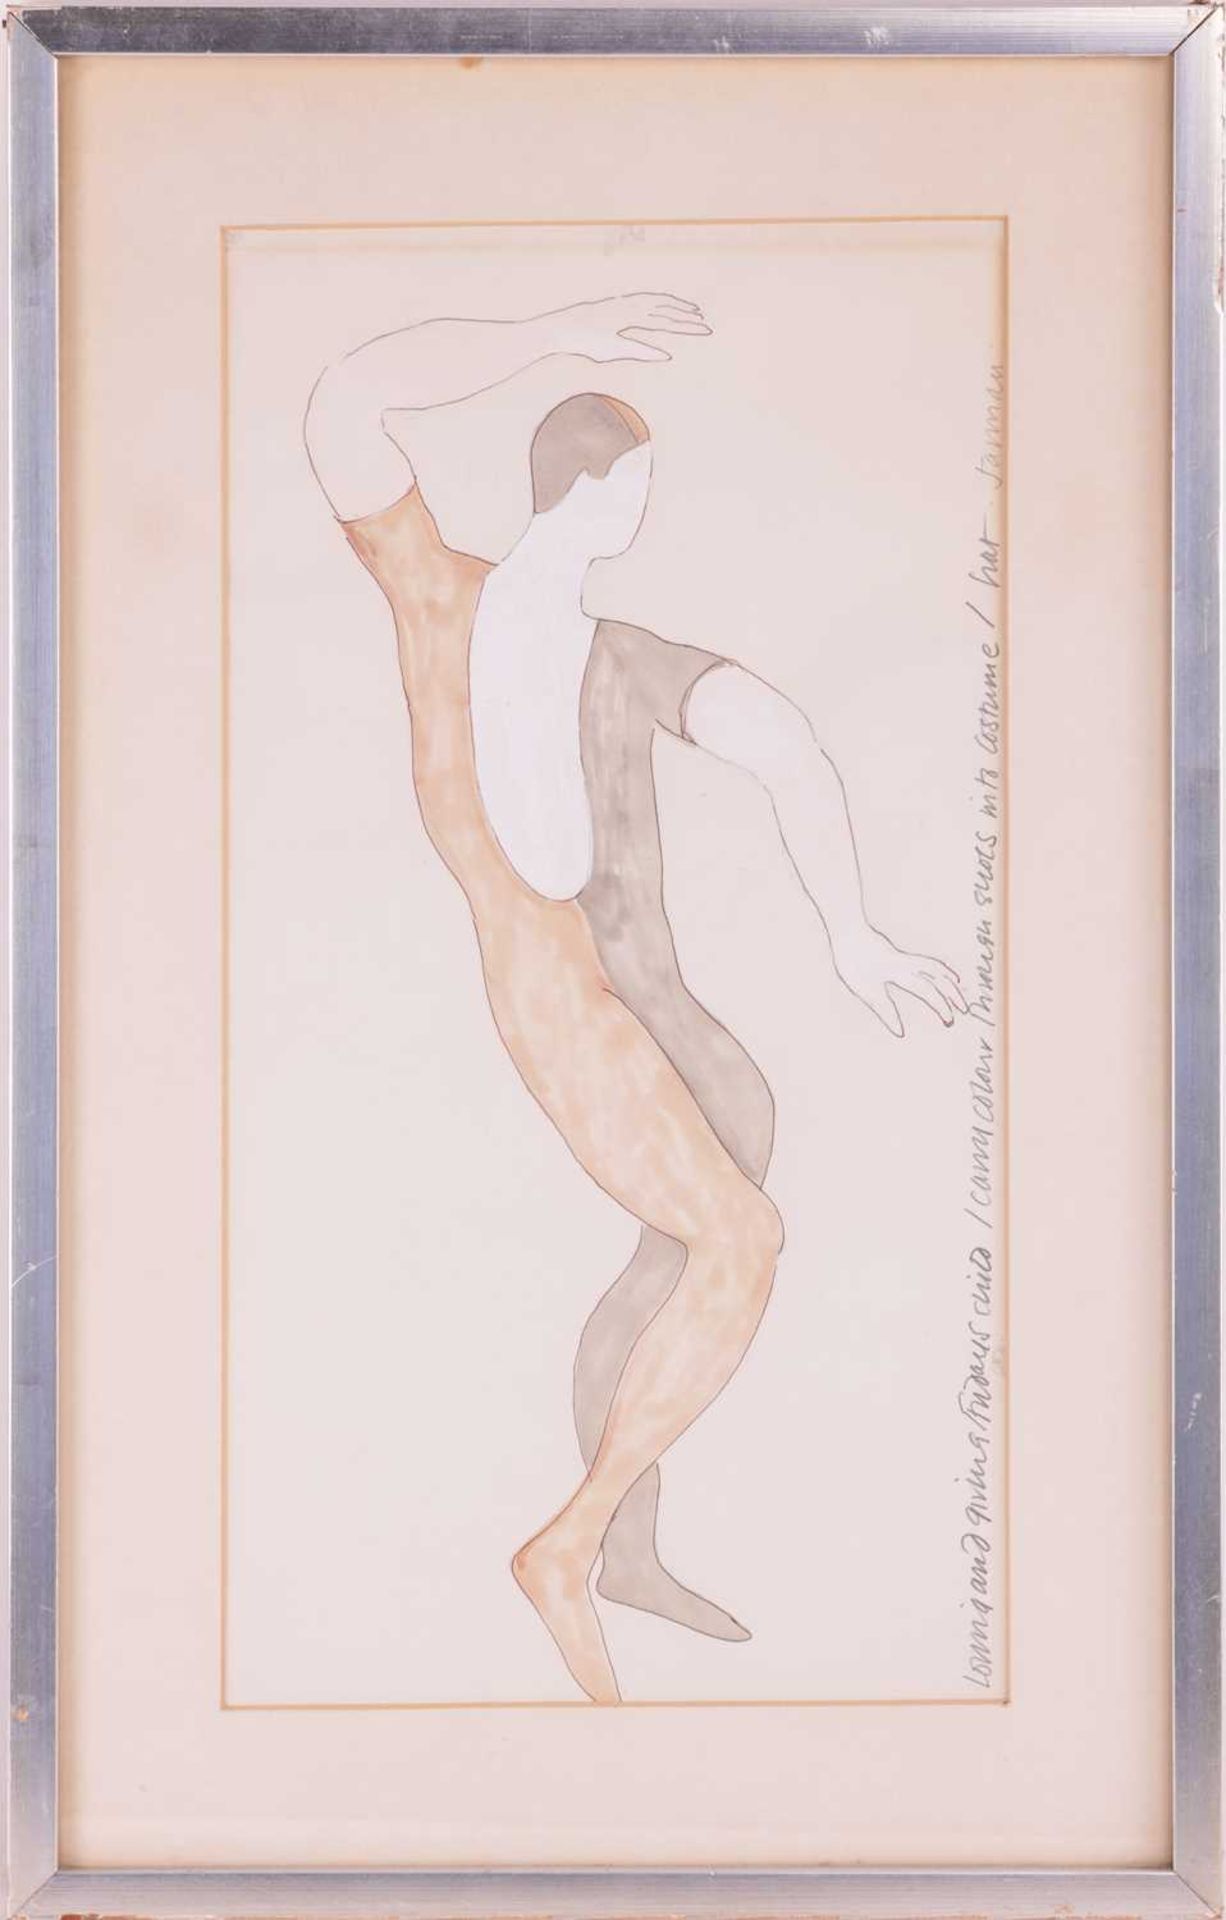 Derek Jarman (1942 - 1994) 'Loving and Giving Fridays Child', signed in pencil, watercolour and whit - Image 2 of 11